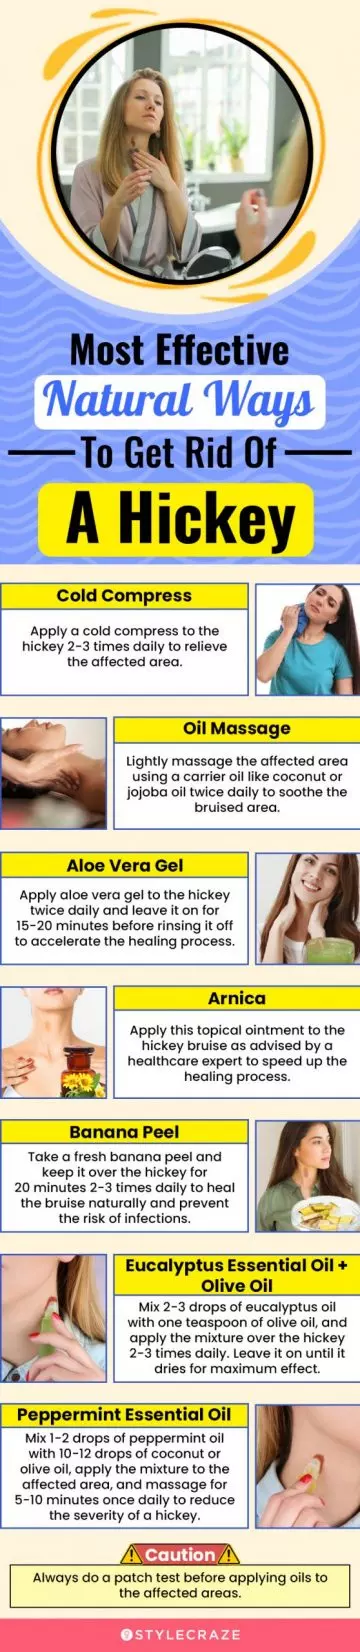 most effective natural ways to get rid of a hickey (infographic)